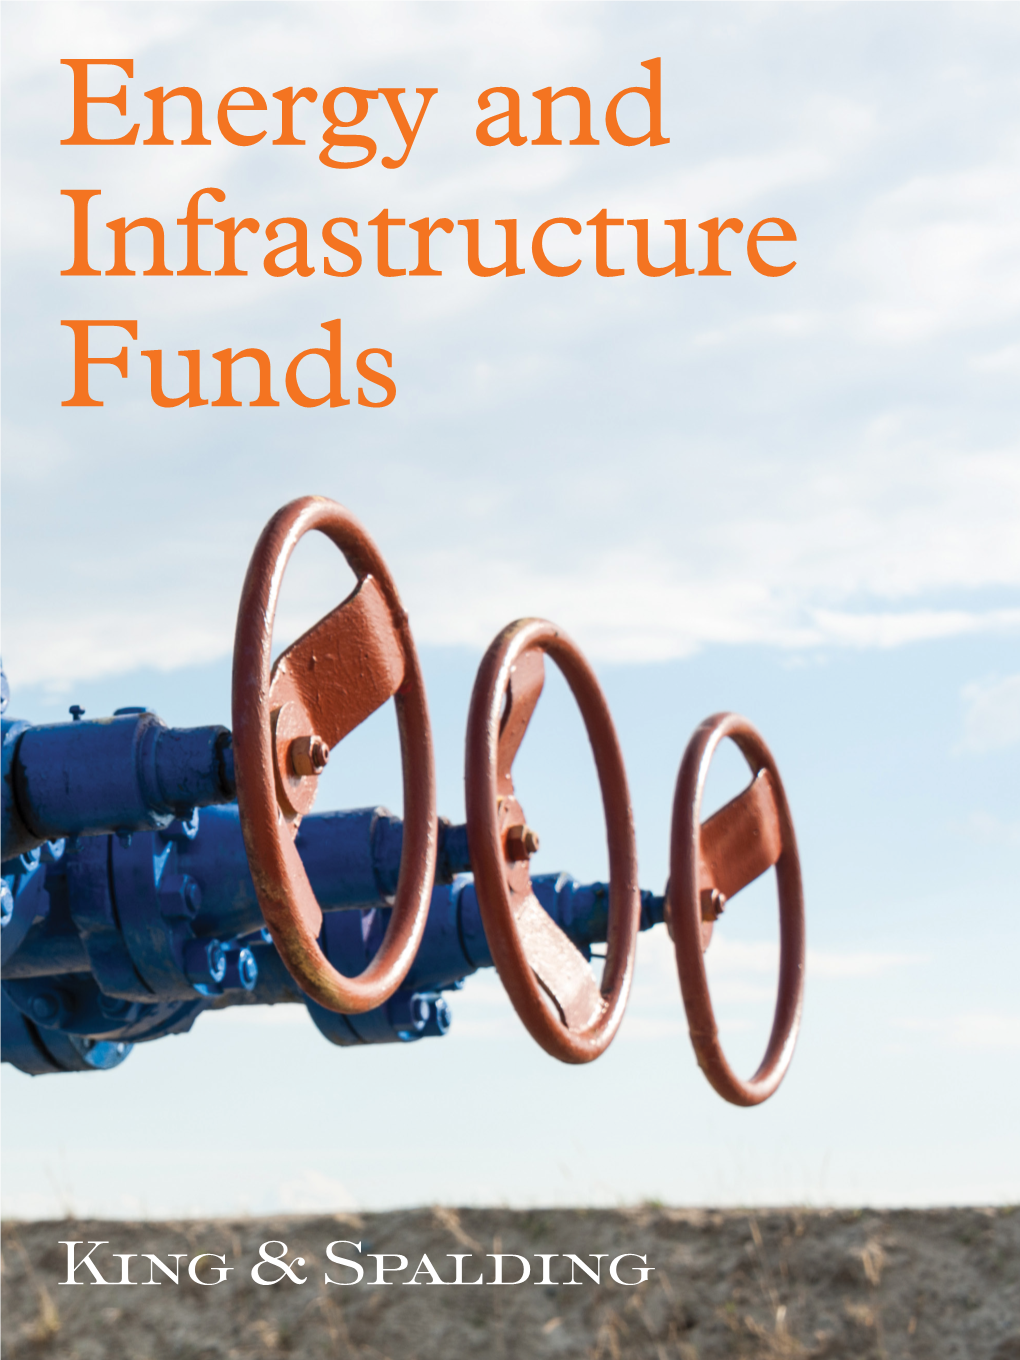 Energy Infrastructure Funds.Pdf